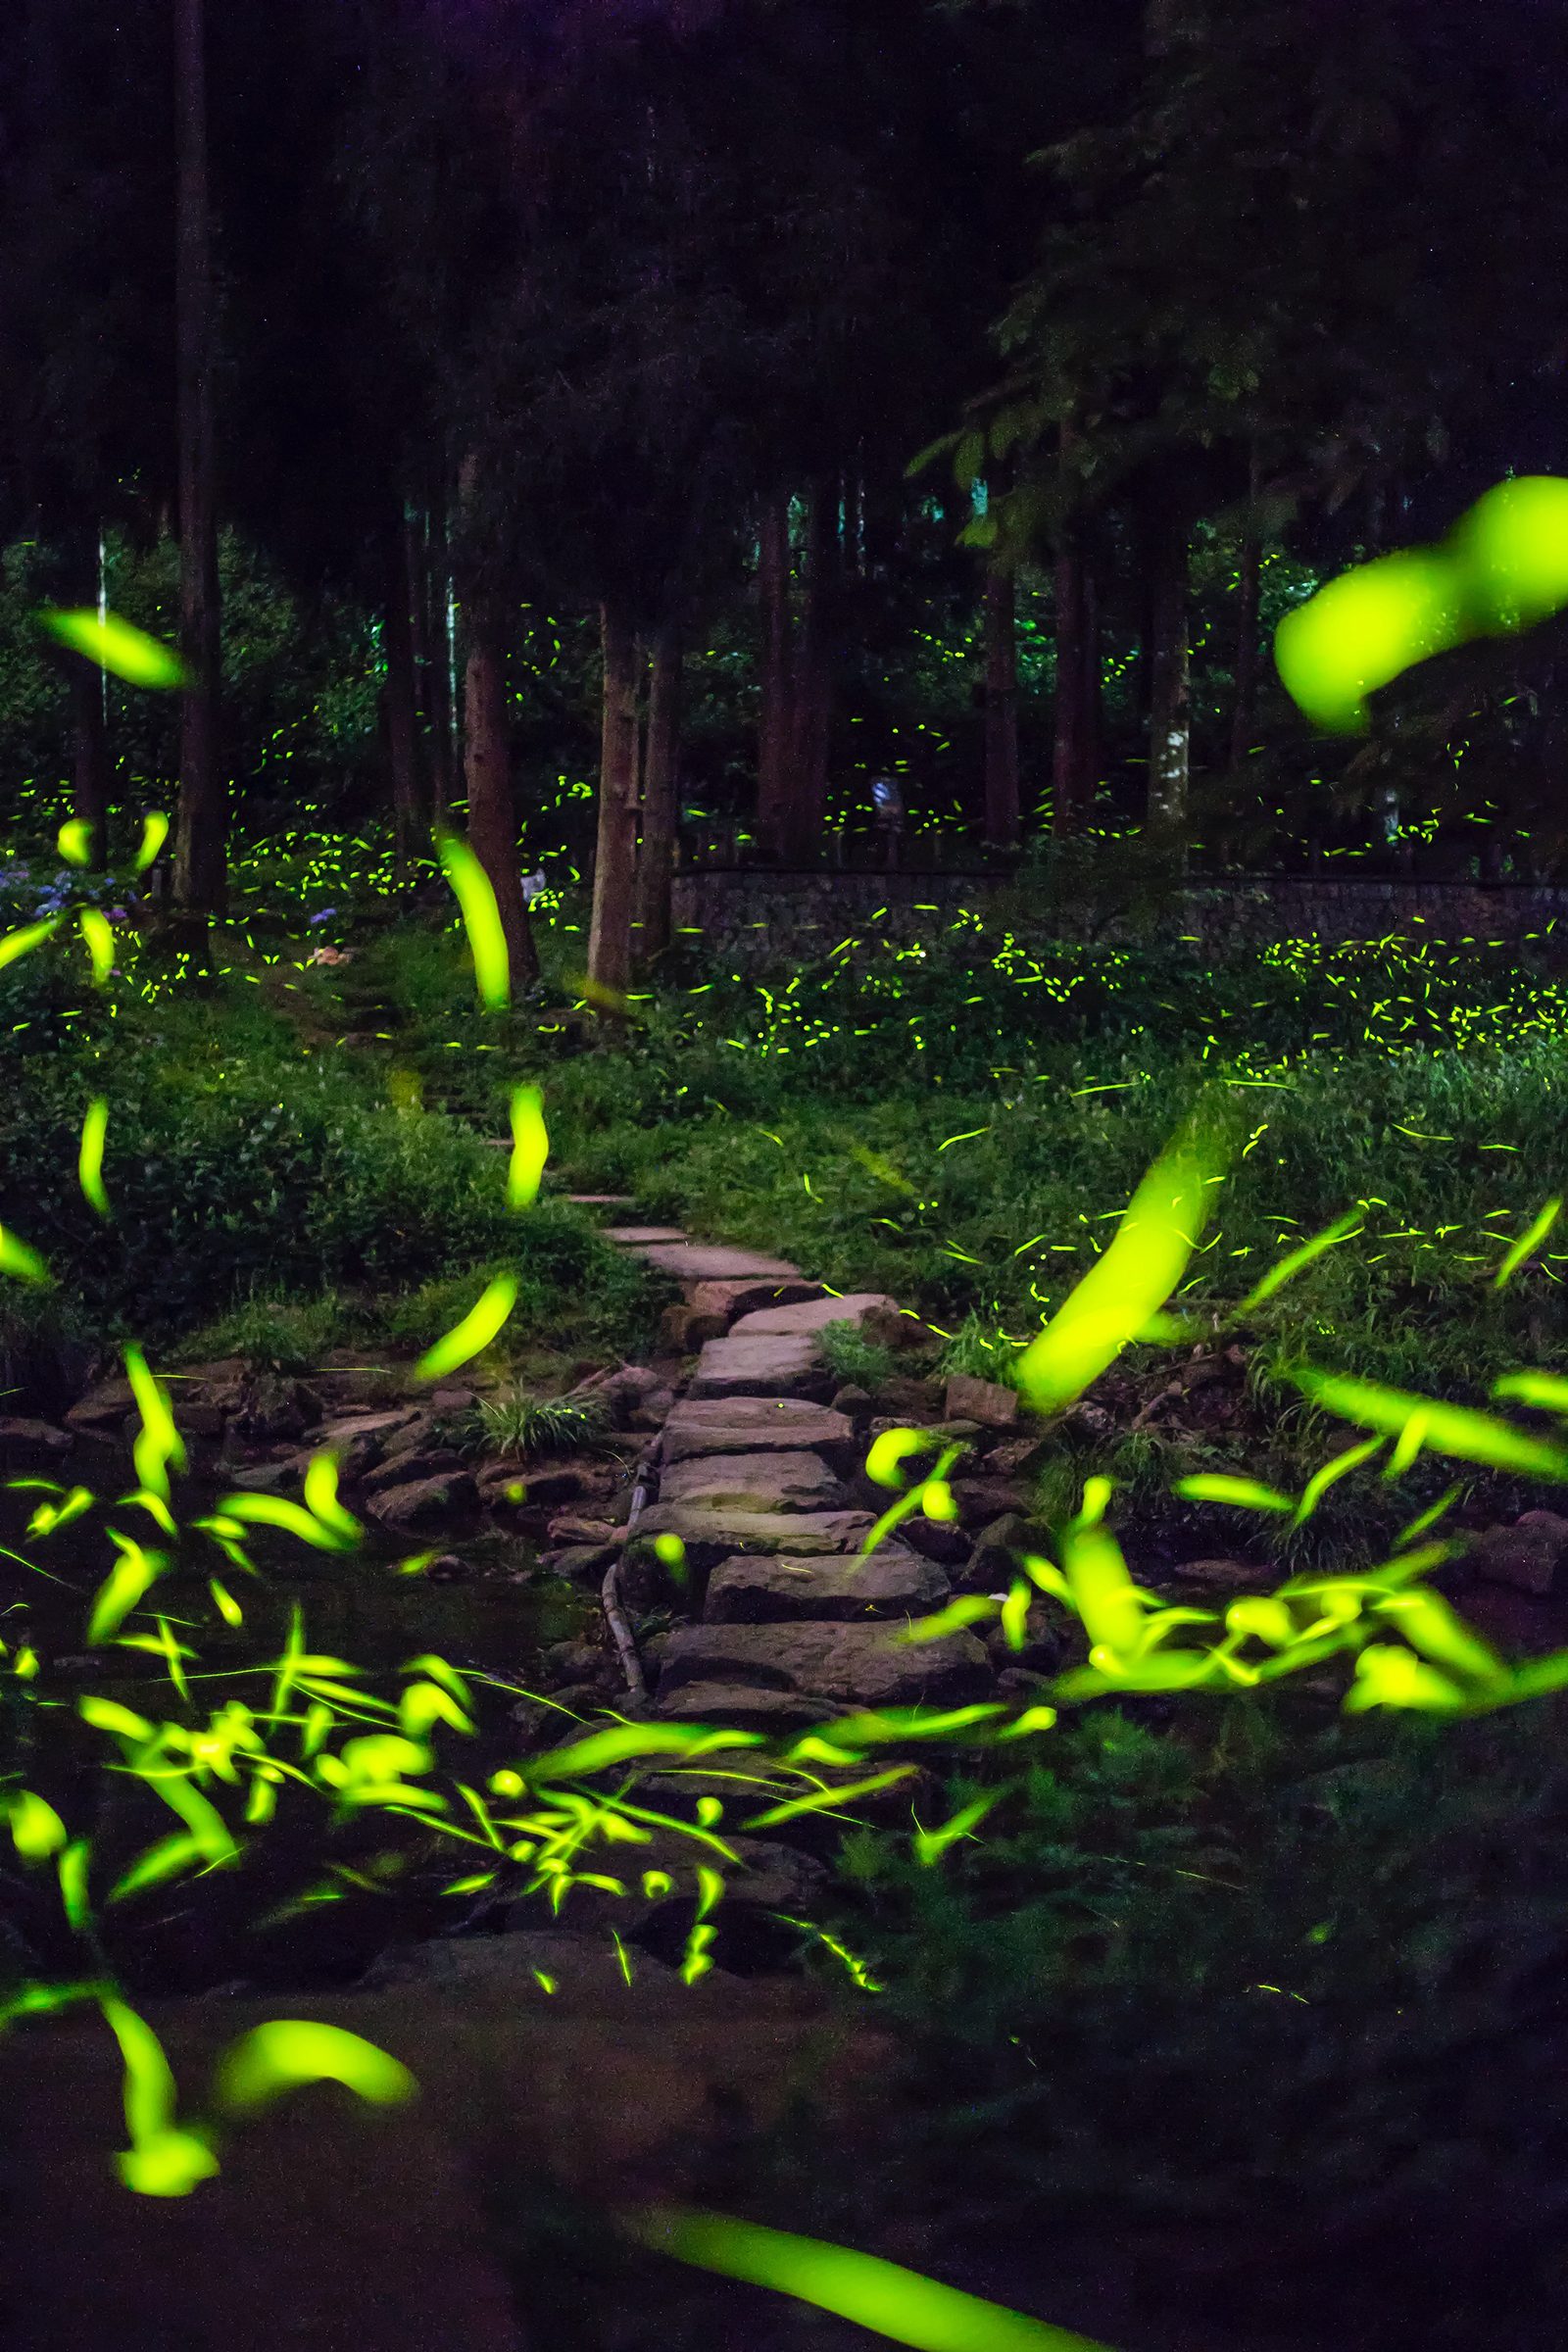 The forest is dotted with mesmerizing lights of fireflies at the Tiantai Mountain scenic area in Qionglai, Sichuan Province. /Provided to CGTN by Qionglai Branch Venue of International Horticultural Exhibition 2024 Chengdu